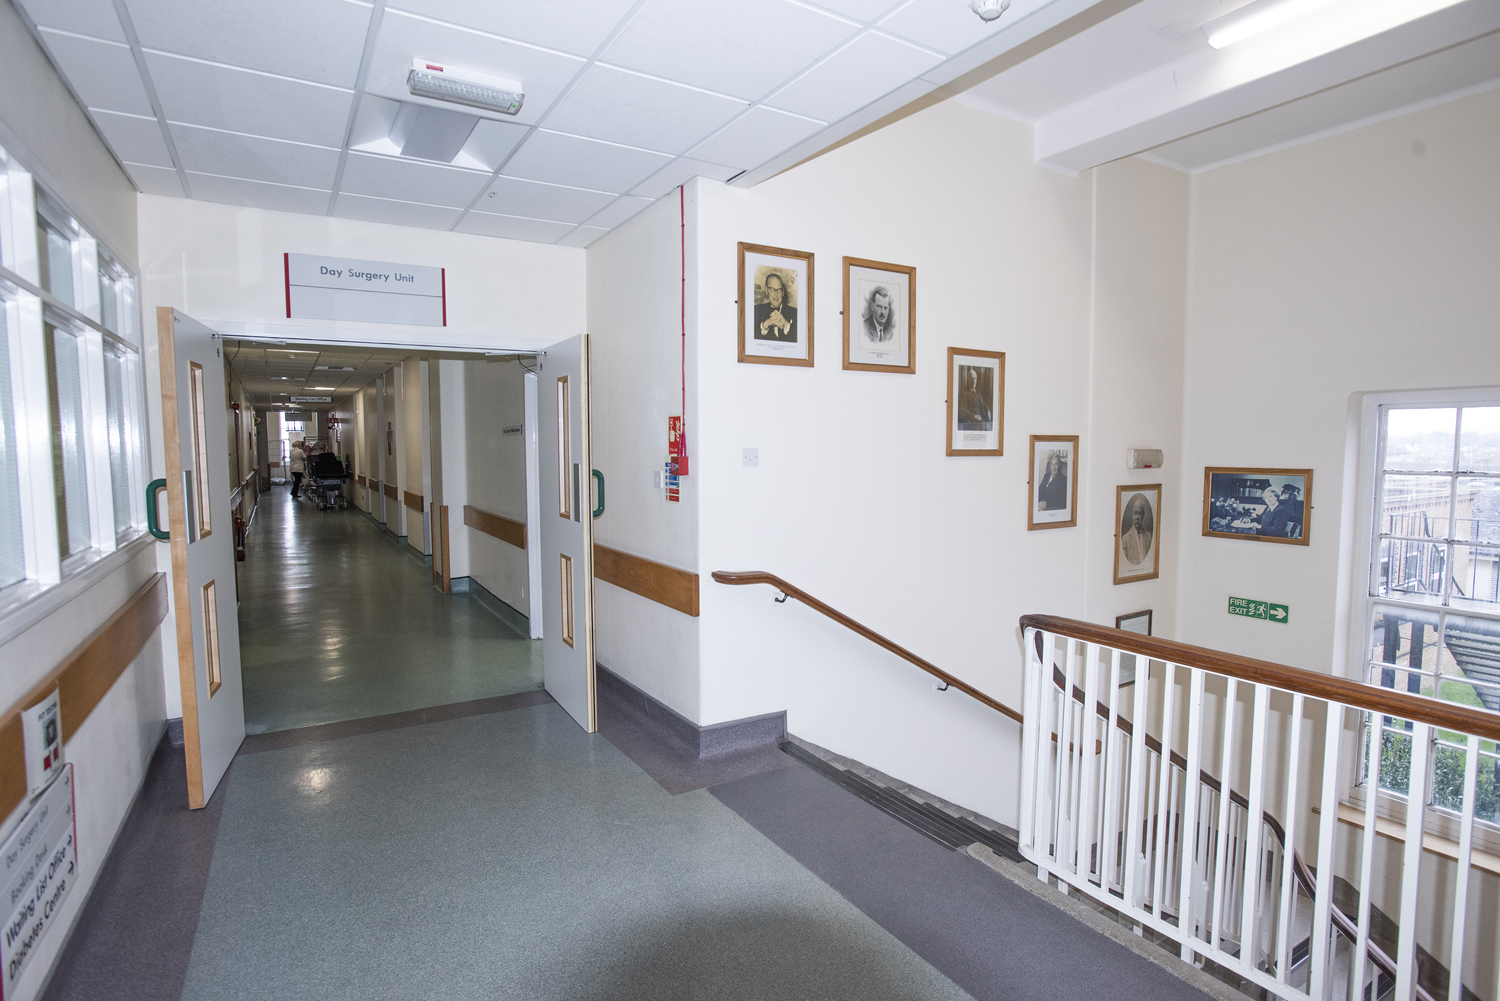 Photo of Day Surgery Unit entrance at QEQM